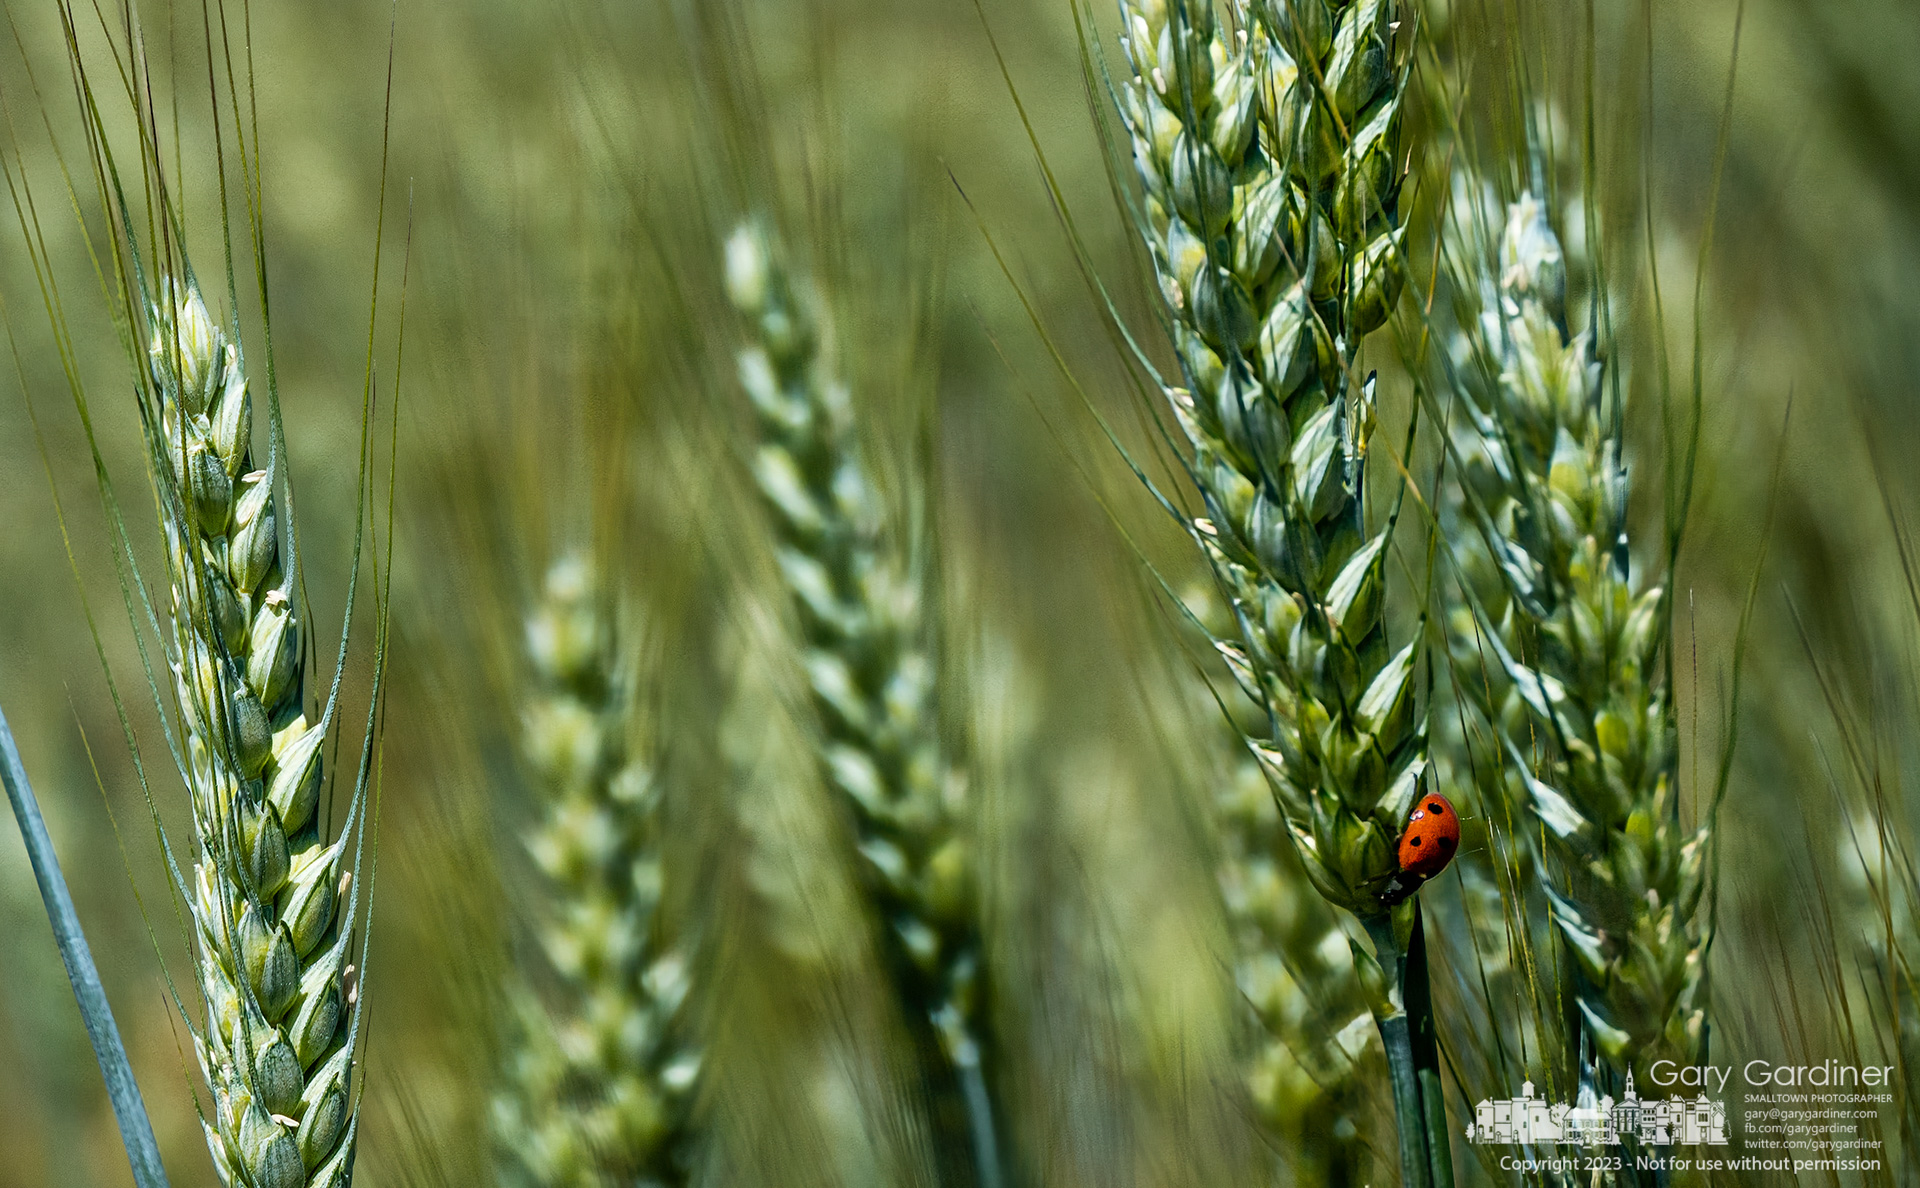 A ladybug works its way down a shaft of wheat looking for food and other ladybugs in a field of winter wheat on Polaris Parkway. My Final Photo for June 2, 2023.